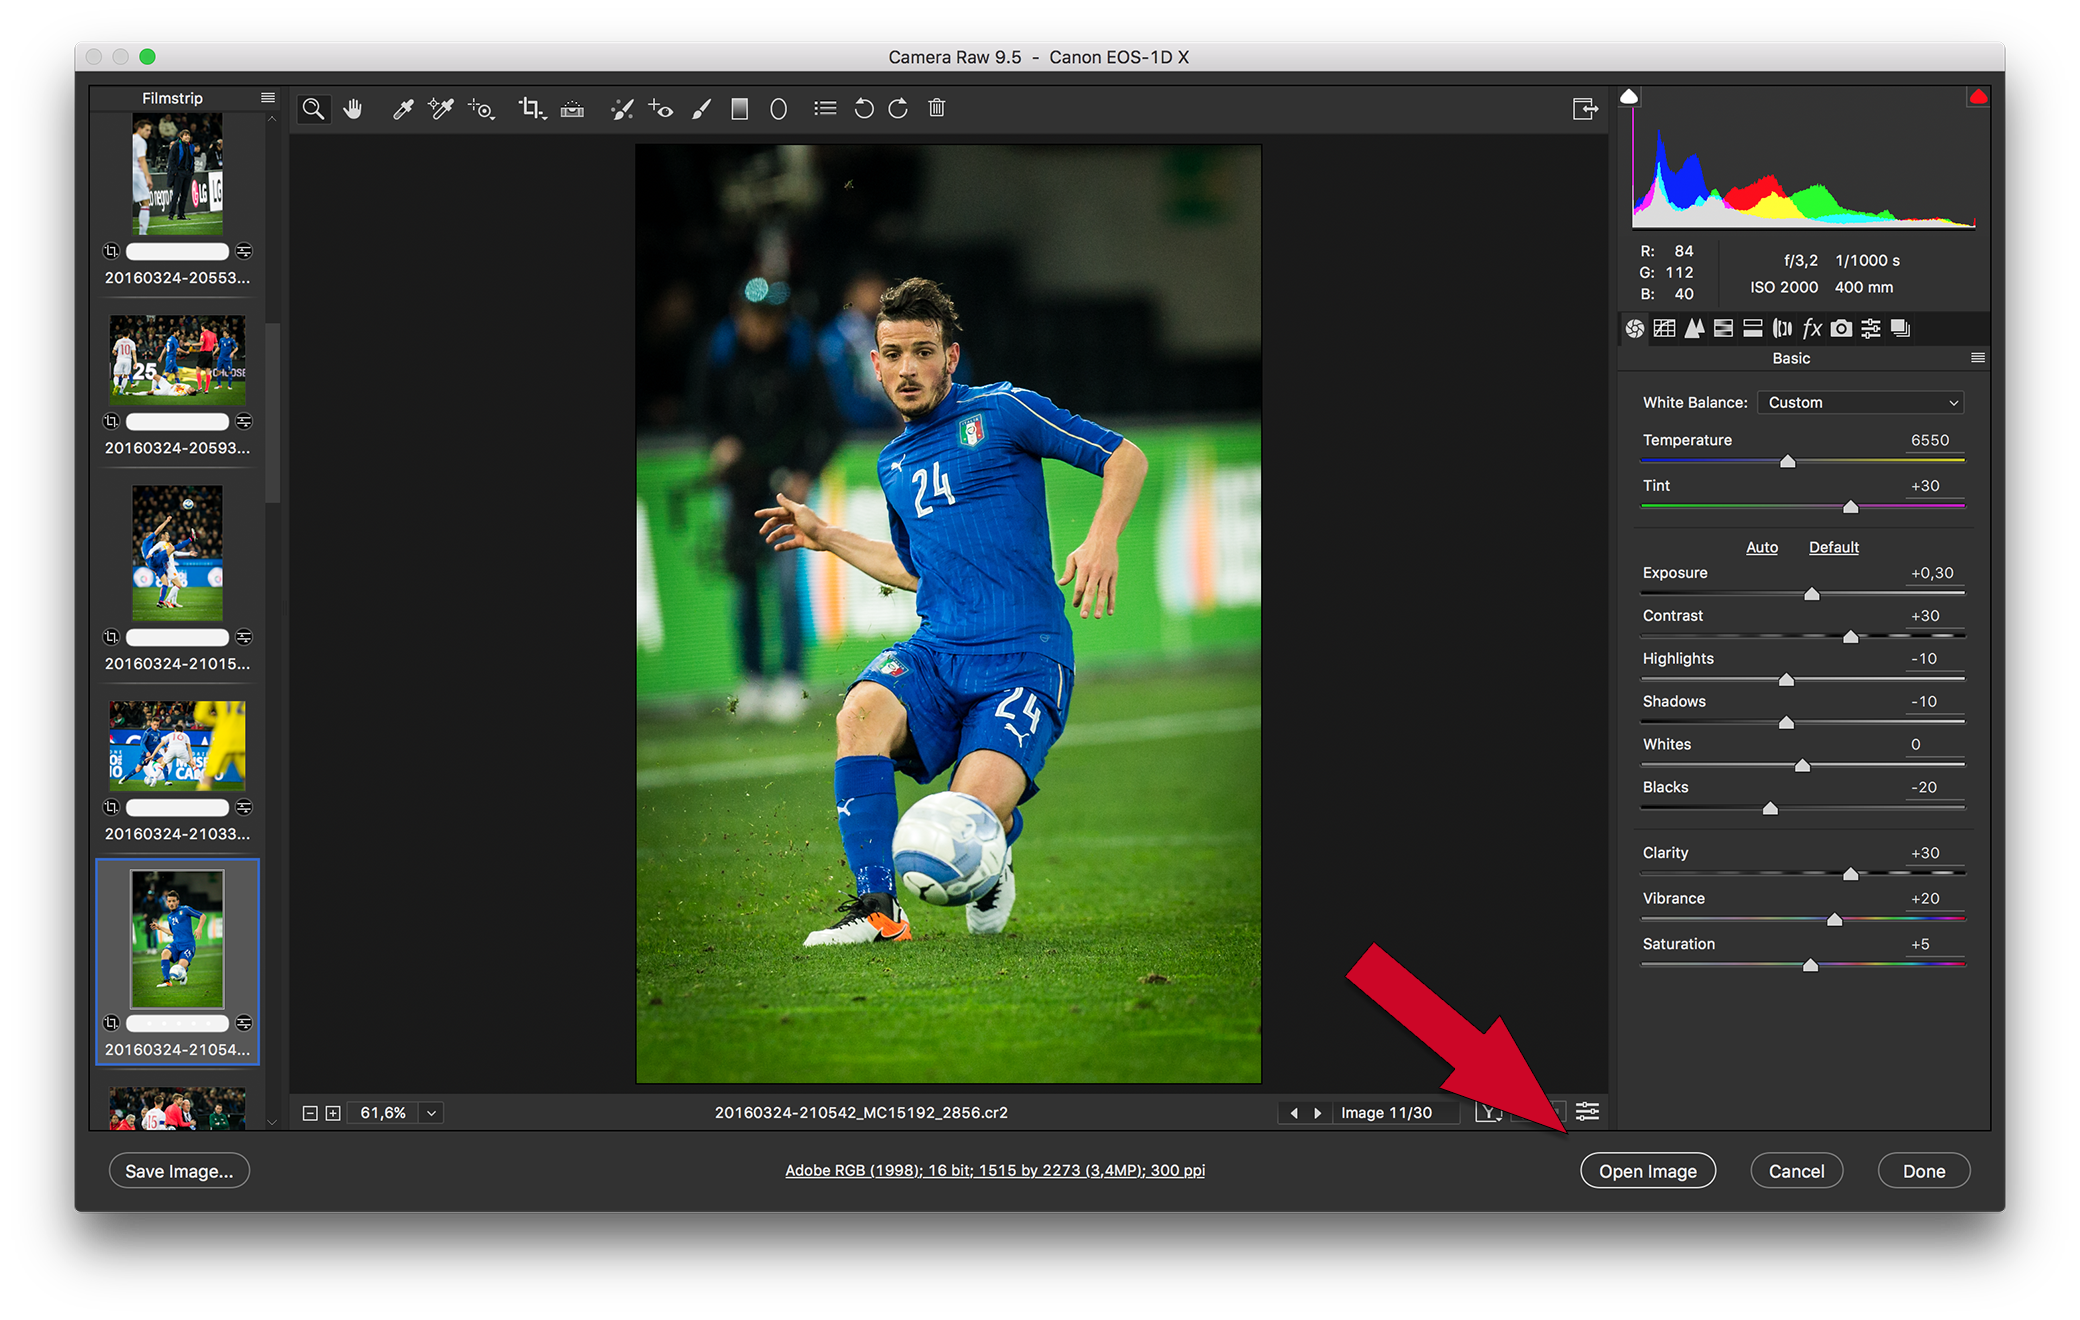 Open Image button in the Adobe Camera RAW application